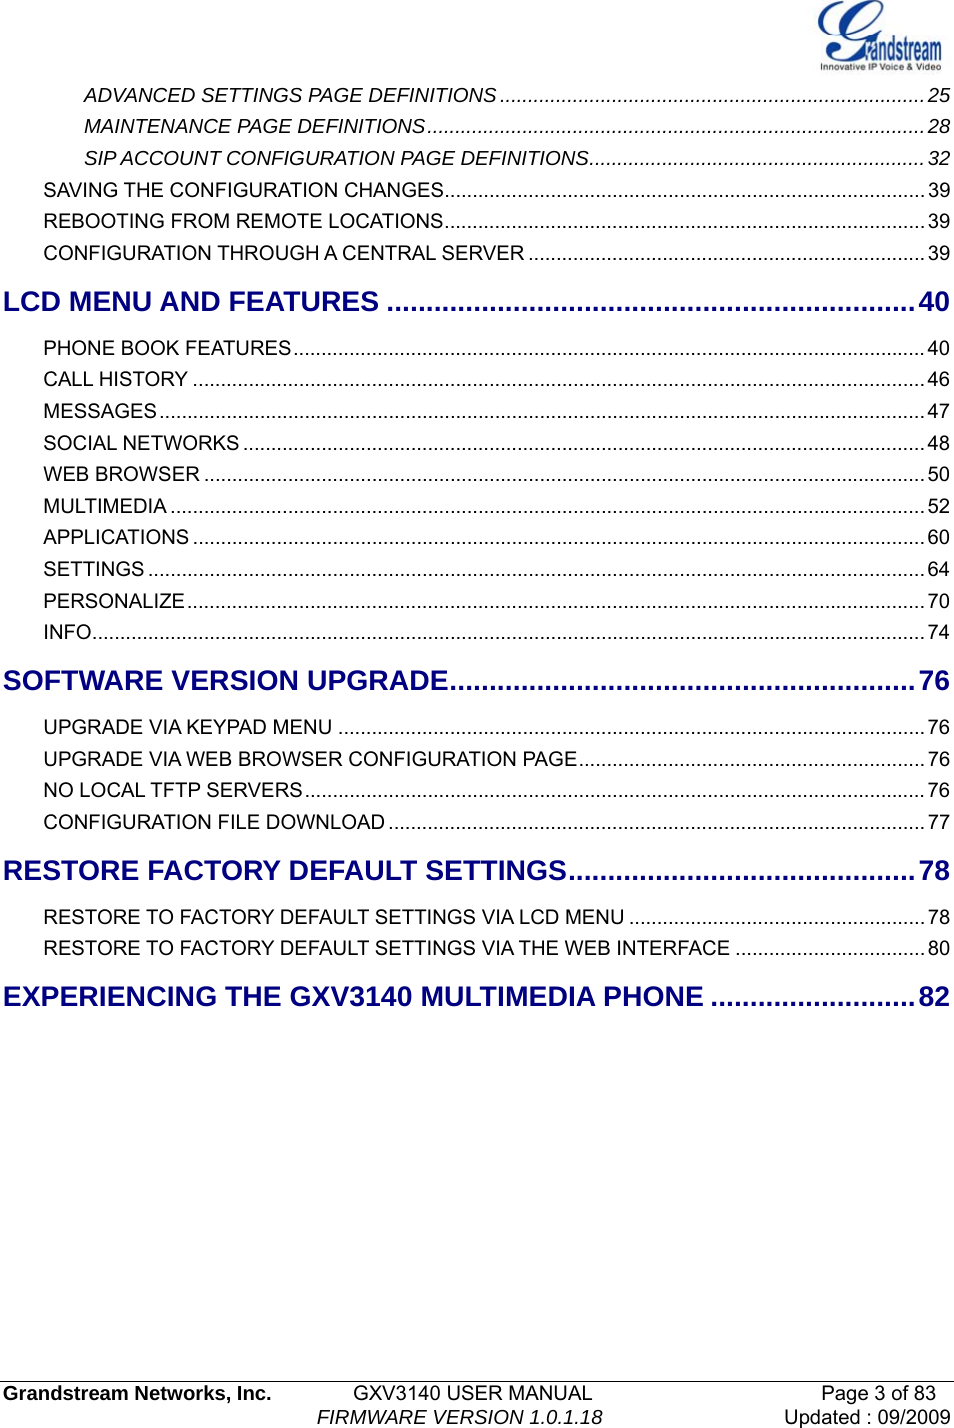   Grandstream Networks, Inc.        GXV3140 USER MANUAL                       Page 3 of 83                                FIRMWARE VERSION 1.0.1.18 Updated : 09/2009  ADVANCED SETTINGS PAGE DEFINITIONS............................................................................25MAINTENANCE PAGE DEFINITIONS.........................................................................................28SIP ACCOUNT CONFIGURATION PAGE DEFINITIONS............................................................32SAVING THE CONFIGURATION CHANGES...................................................................................... 39REBOOTING FROM REMOTE LOCATIONS......................................................................................39CONFIGURATION THROUGH A CENTRAL SERVER .......................................................................39LCD MENU AND FEATURES ...................................................................40PHONE BOOK FEATURES................................................................................................................. 40CALL HISTORY ................................................................................................................................... 46MESSAGES......................................................................................................................................... 47SOCIAL NETWORKS .......................................................................................................................... 48WEB BROWSER ................................................................................................................................. 50MULTIMEDIA ....................................................................................................................................... 52APPLICATIONS ................................................................................................................................... 60SETTINGS ........................................................................................................................................... 64PERSONALIZE.................................................................................................................................... 70INFO..................................................................................................................................................... 74SOFTWARE VERSION UPGRADE...........................................................76UPGRADE VIA KEYPAD MENU .........................................................................................................76UPGRADE VIA WEB BROWSER CONFIGURATION PAGE..............................................................76NO LOCAL TFTP SERVERS............................................................................................................... 76CONFIGURATION FILE DOWNLOAD ................................................................................................ 77RESTORE FACTORY DEFAULT SETTINGS............................................78RESTORE TO FACTORY DEFAULT SETTINGS VIA LCD MENU .....................................................78RESTORE TO FACTORY DEFAULT SETTINGS VIA THE WEB INTERFACE ..................................80EXPERIENCING THE GXV3140 MULTIMEDIA PHONE ..........................82          